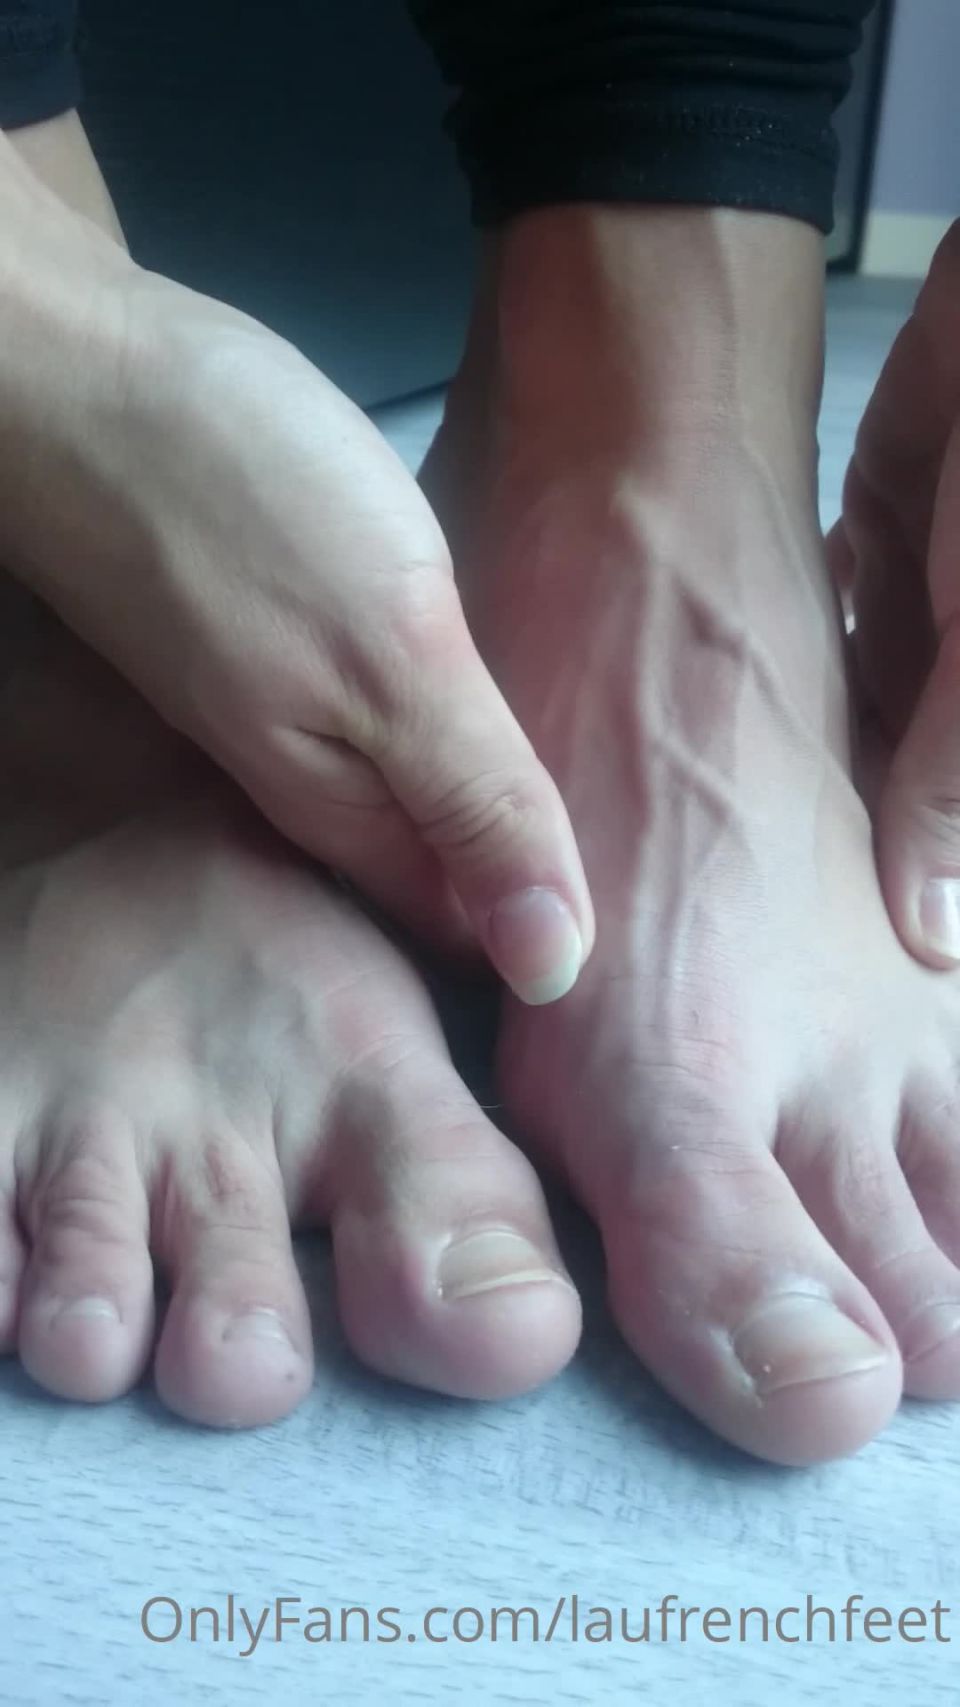 Laufrenchfeet - footjob video veiny feet after sport session 15-04-2021